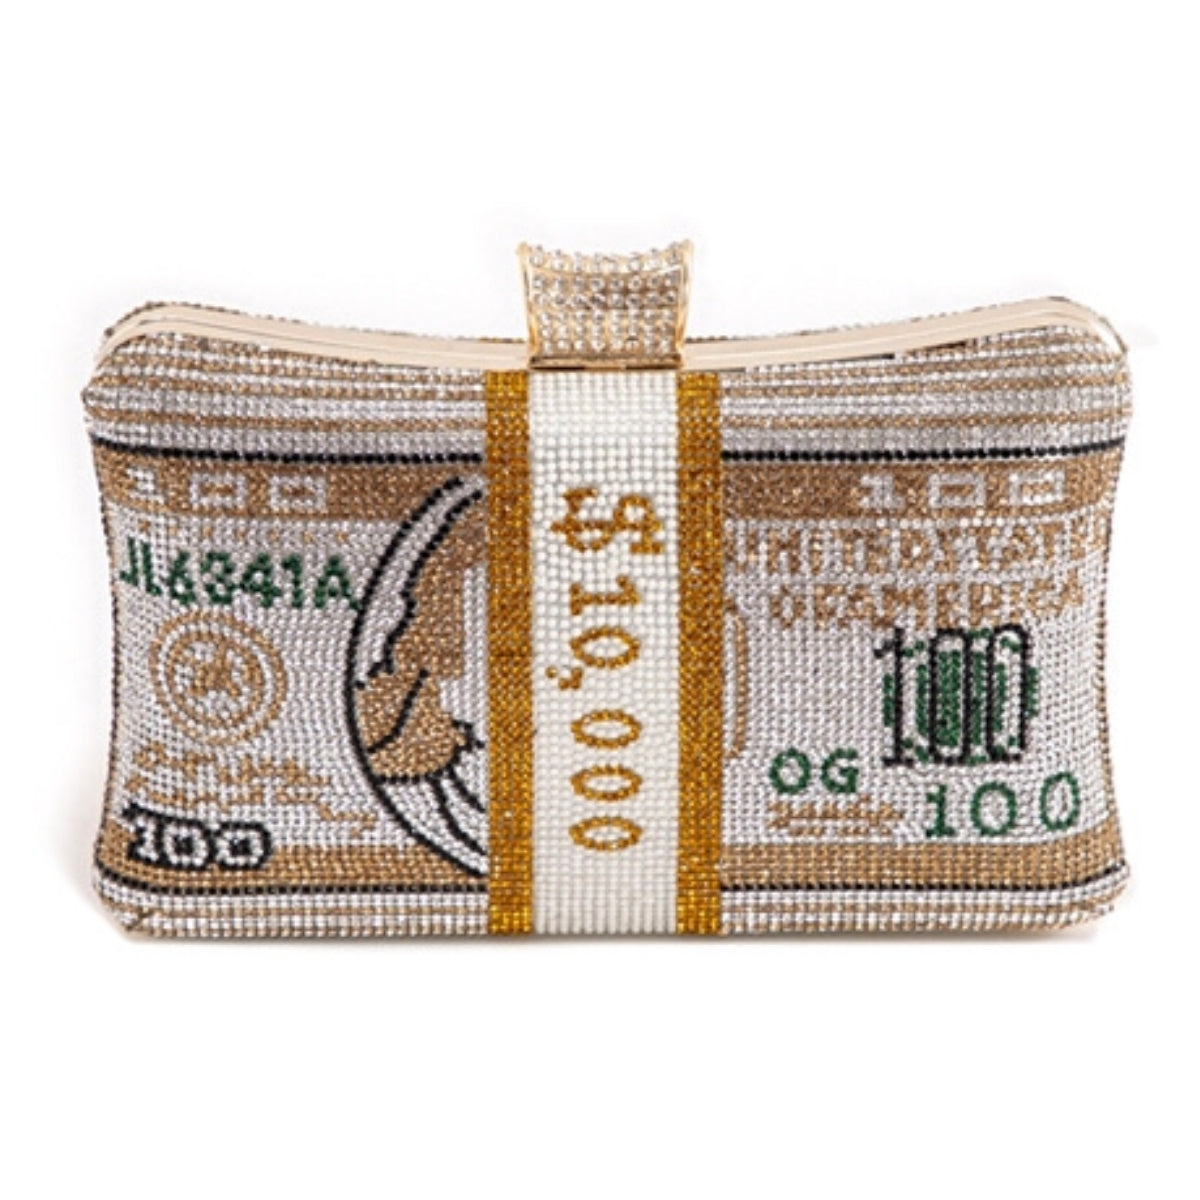 Gold Bling Banded Cash Luxury Clutch